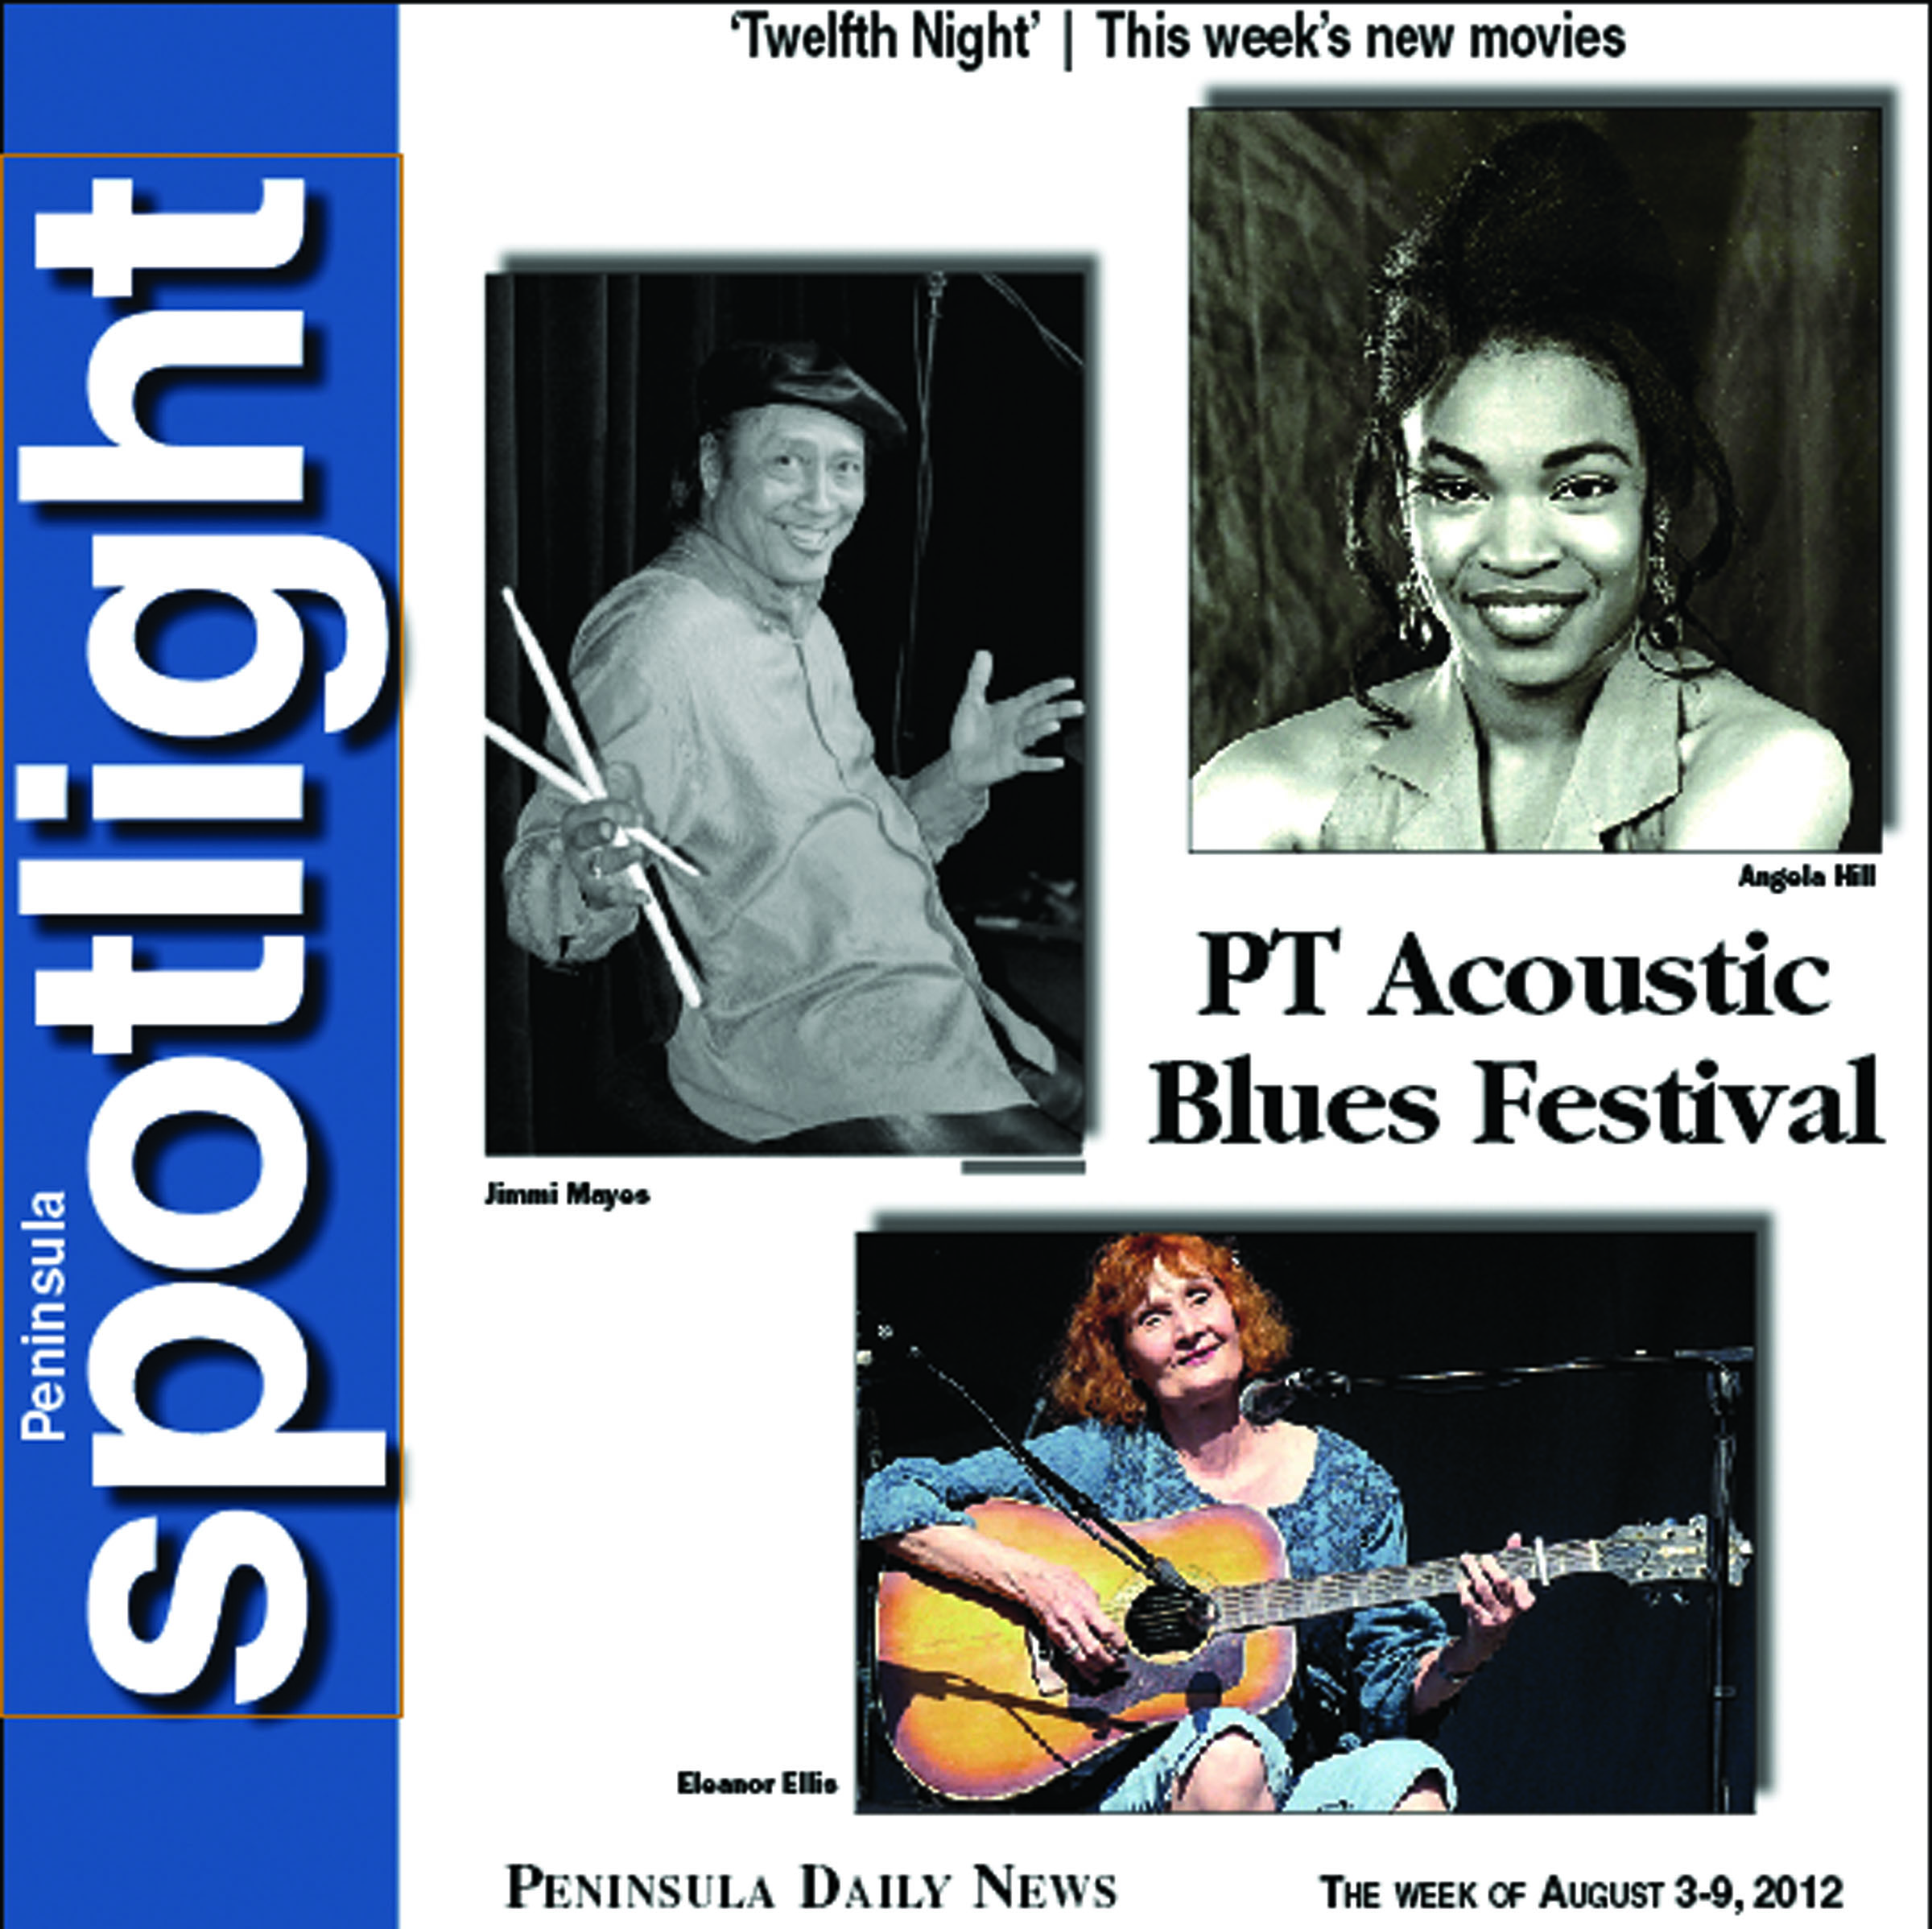 IN THE PENINSULA SPOTLIGHT: Not just any old summertime blues